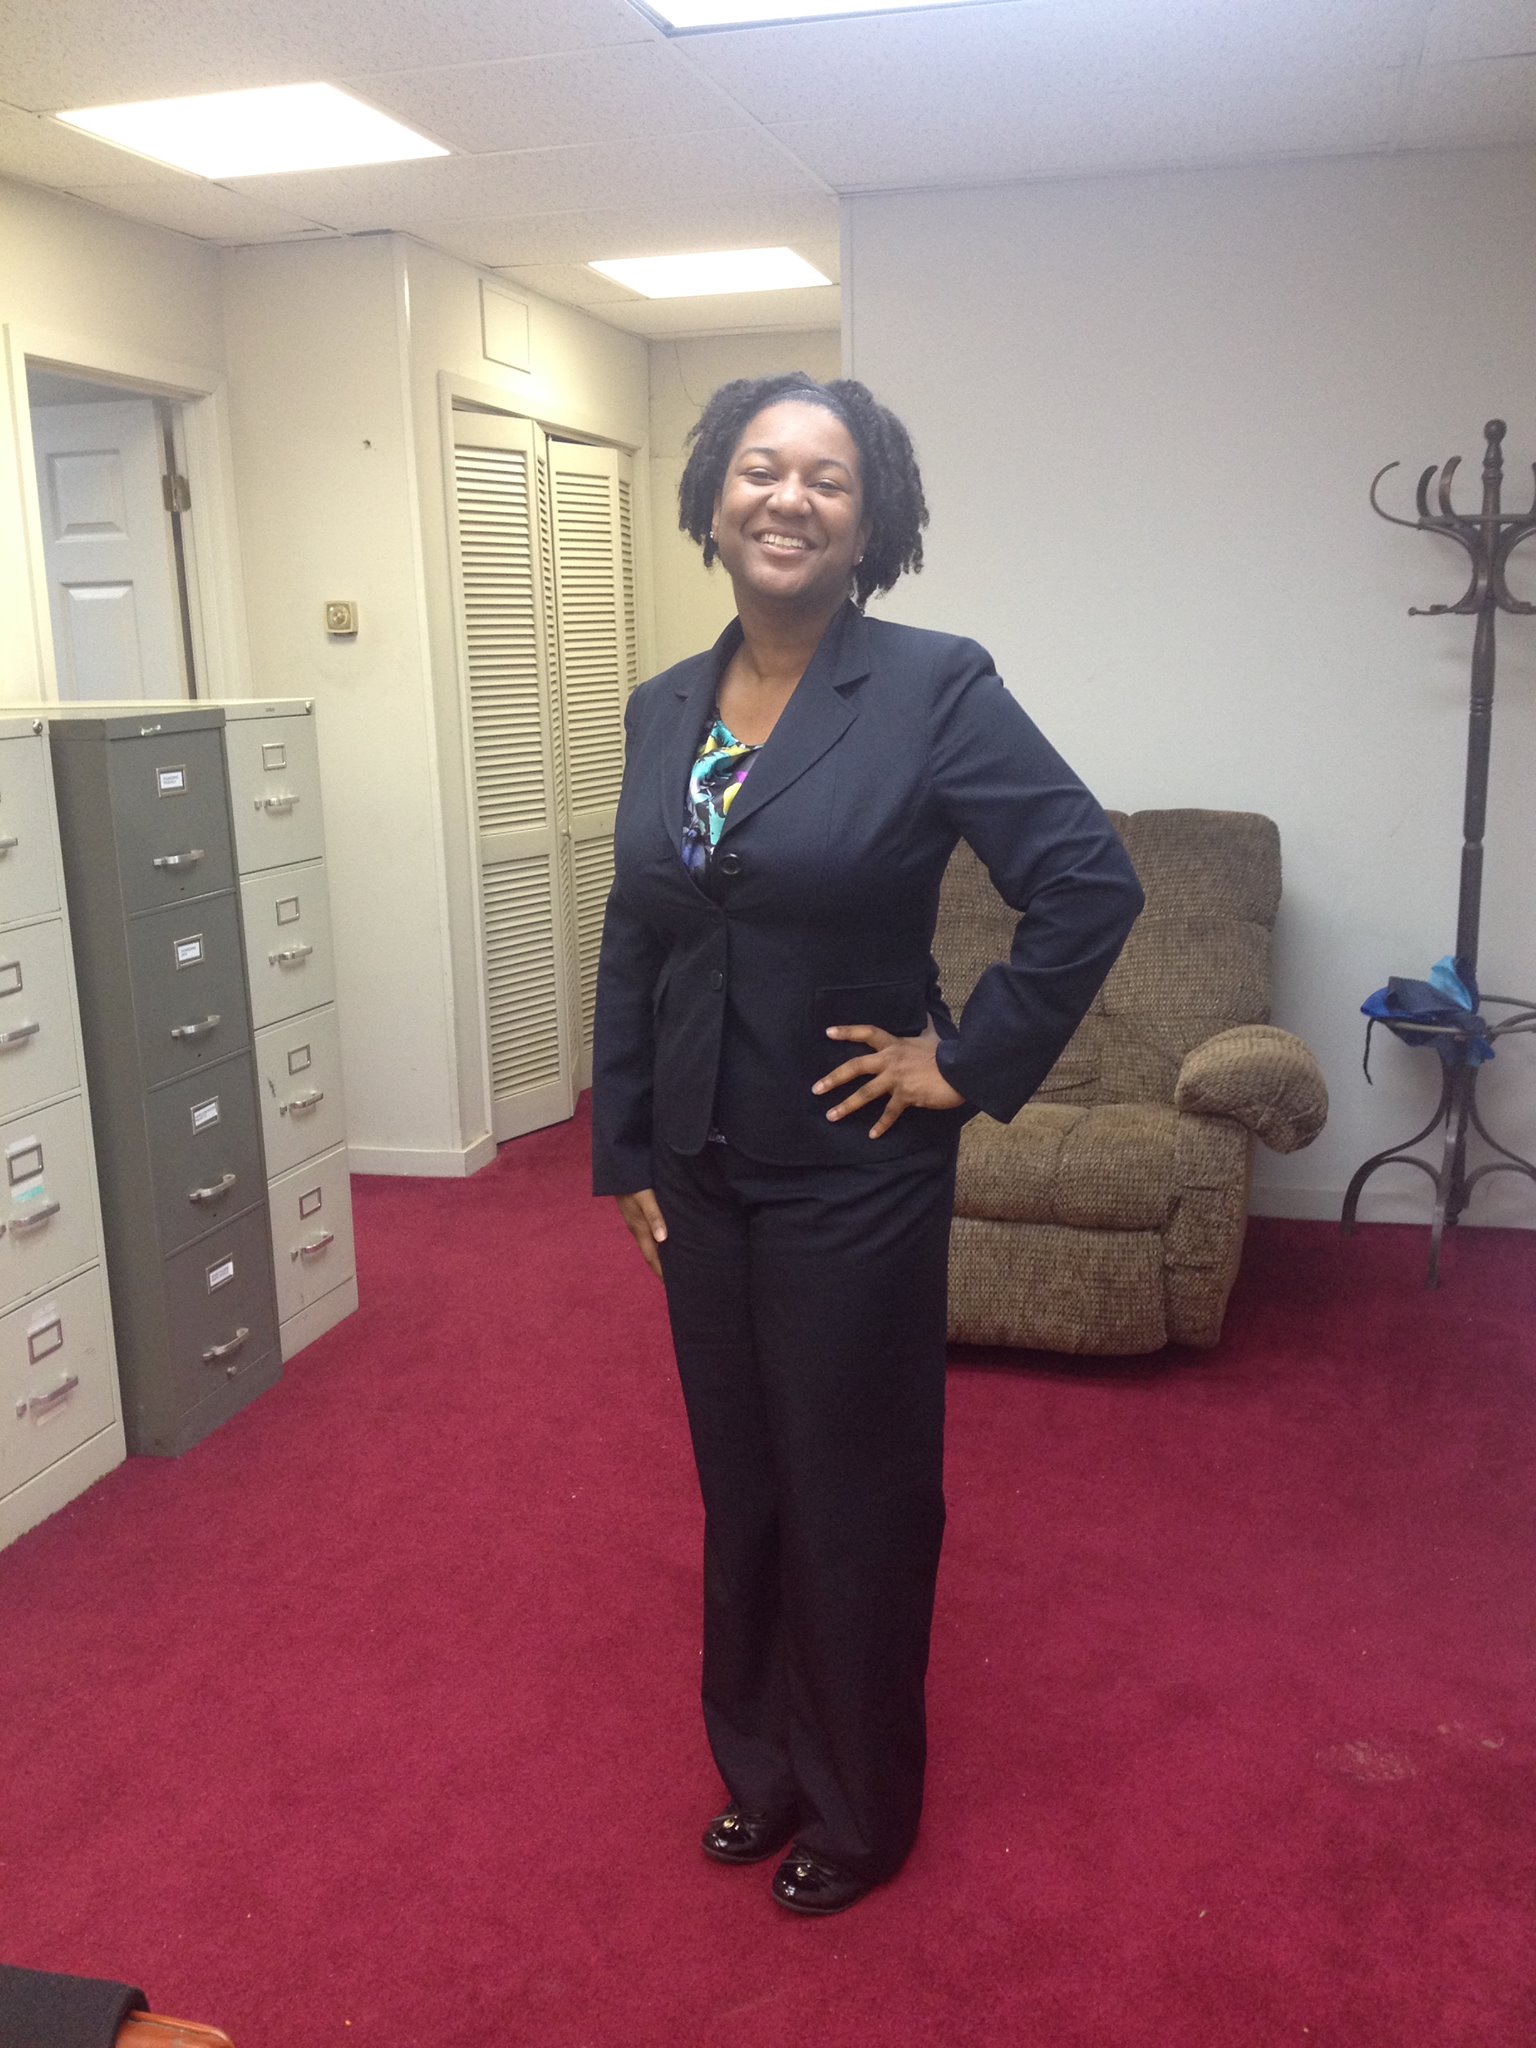 Law Office of Chaka Smith 218 North St, Cleveland Mississippi 38732